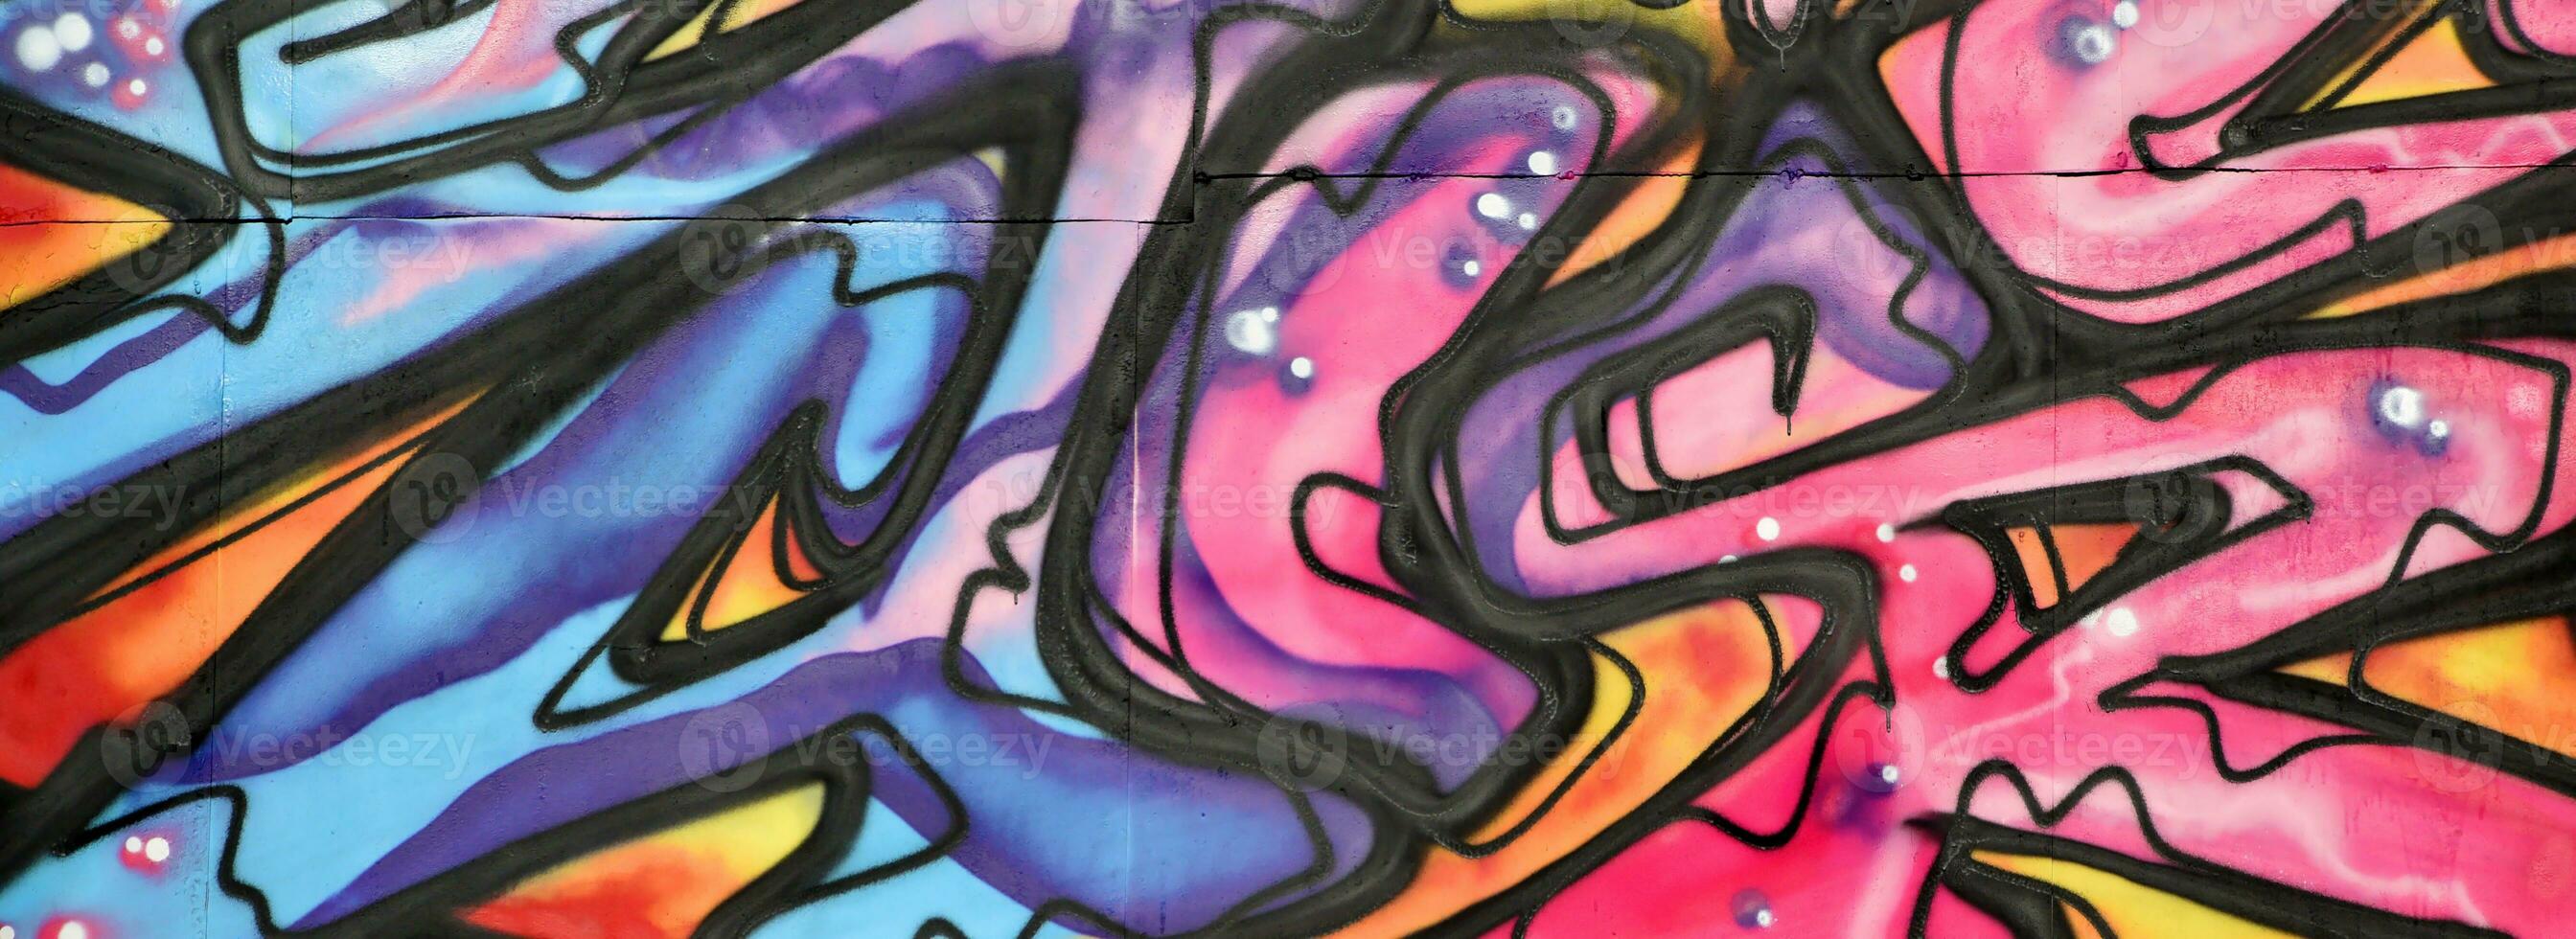 Colorful background of graffiti painting artwork with bright aerosol strips and beautiful colors photo